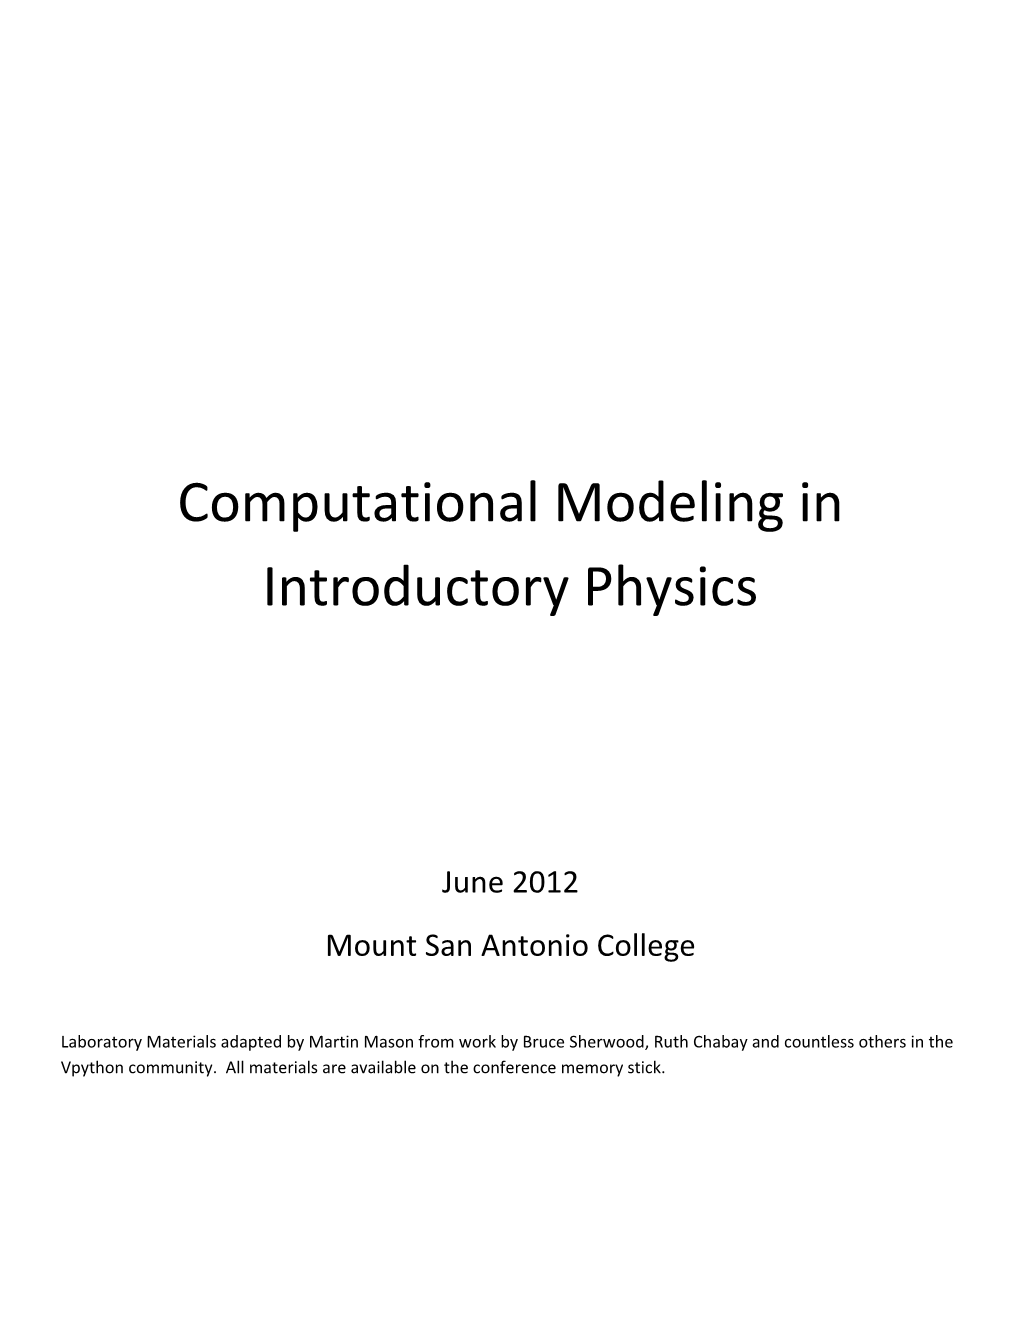 Computational Modeling in Introductory Physics